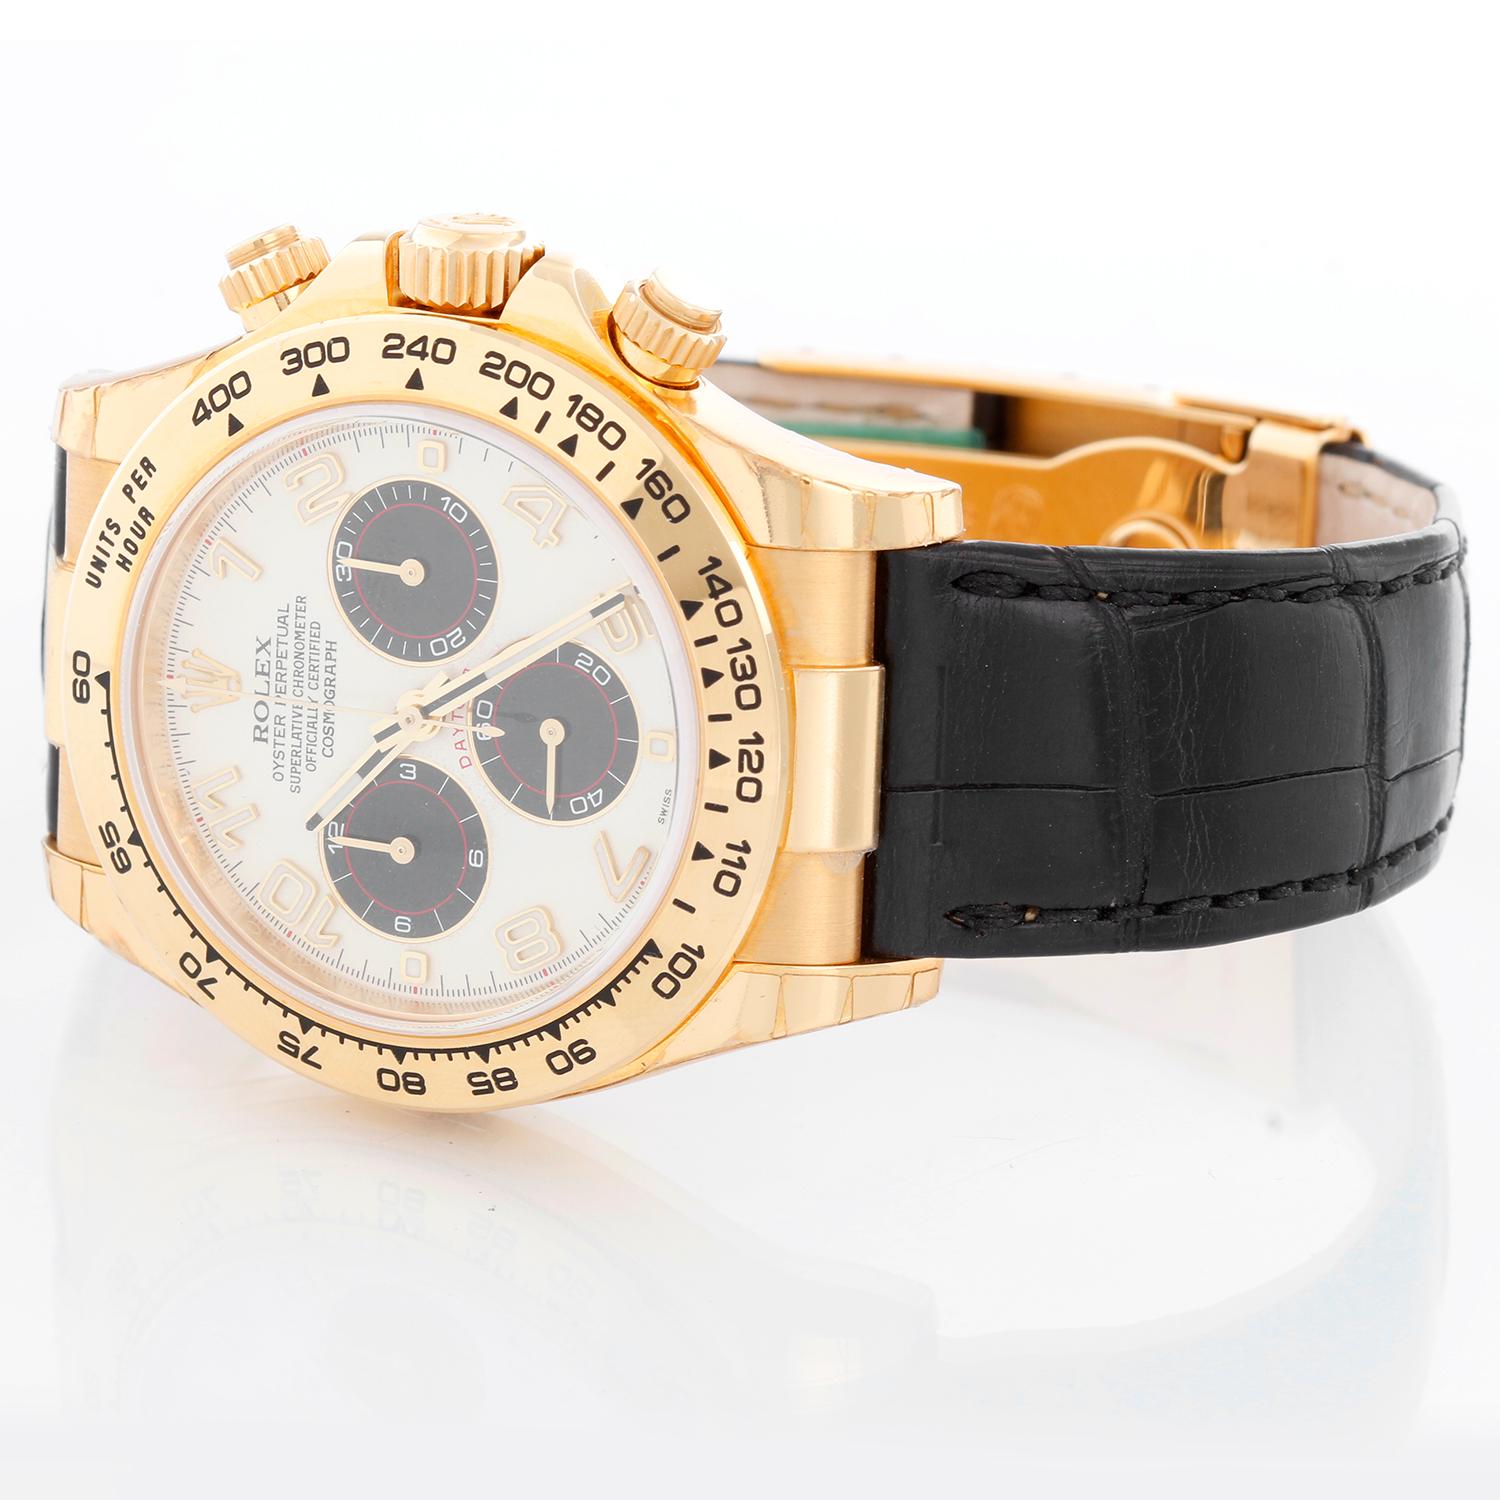 Rolex Cosmograph Daytona Men's 18k Yellow Gold Watch 116518 - Automatic winding, chronograph, 44 jewels, sapphire crystal. 18k yellow gold case and bezel with stickers . White dial with gold Arabic numerals known as the Panda Dial . Rolex leather